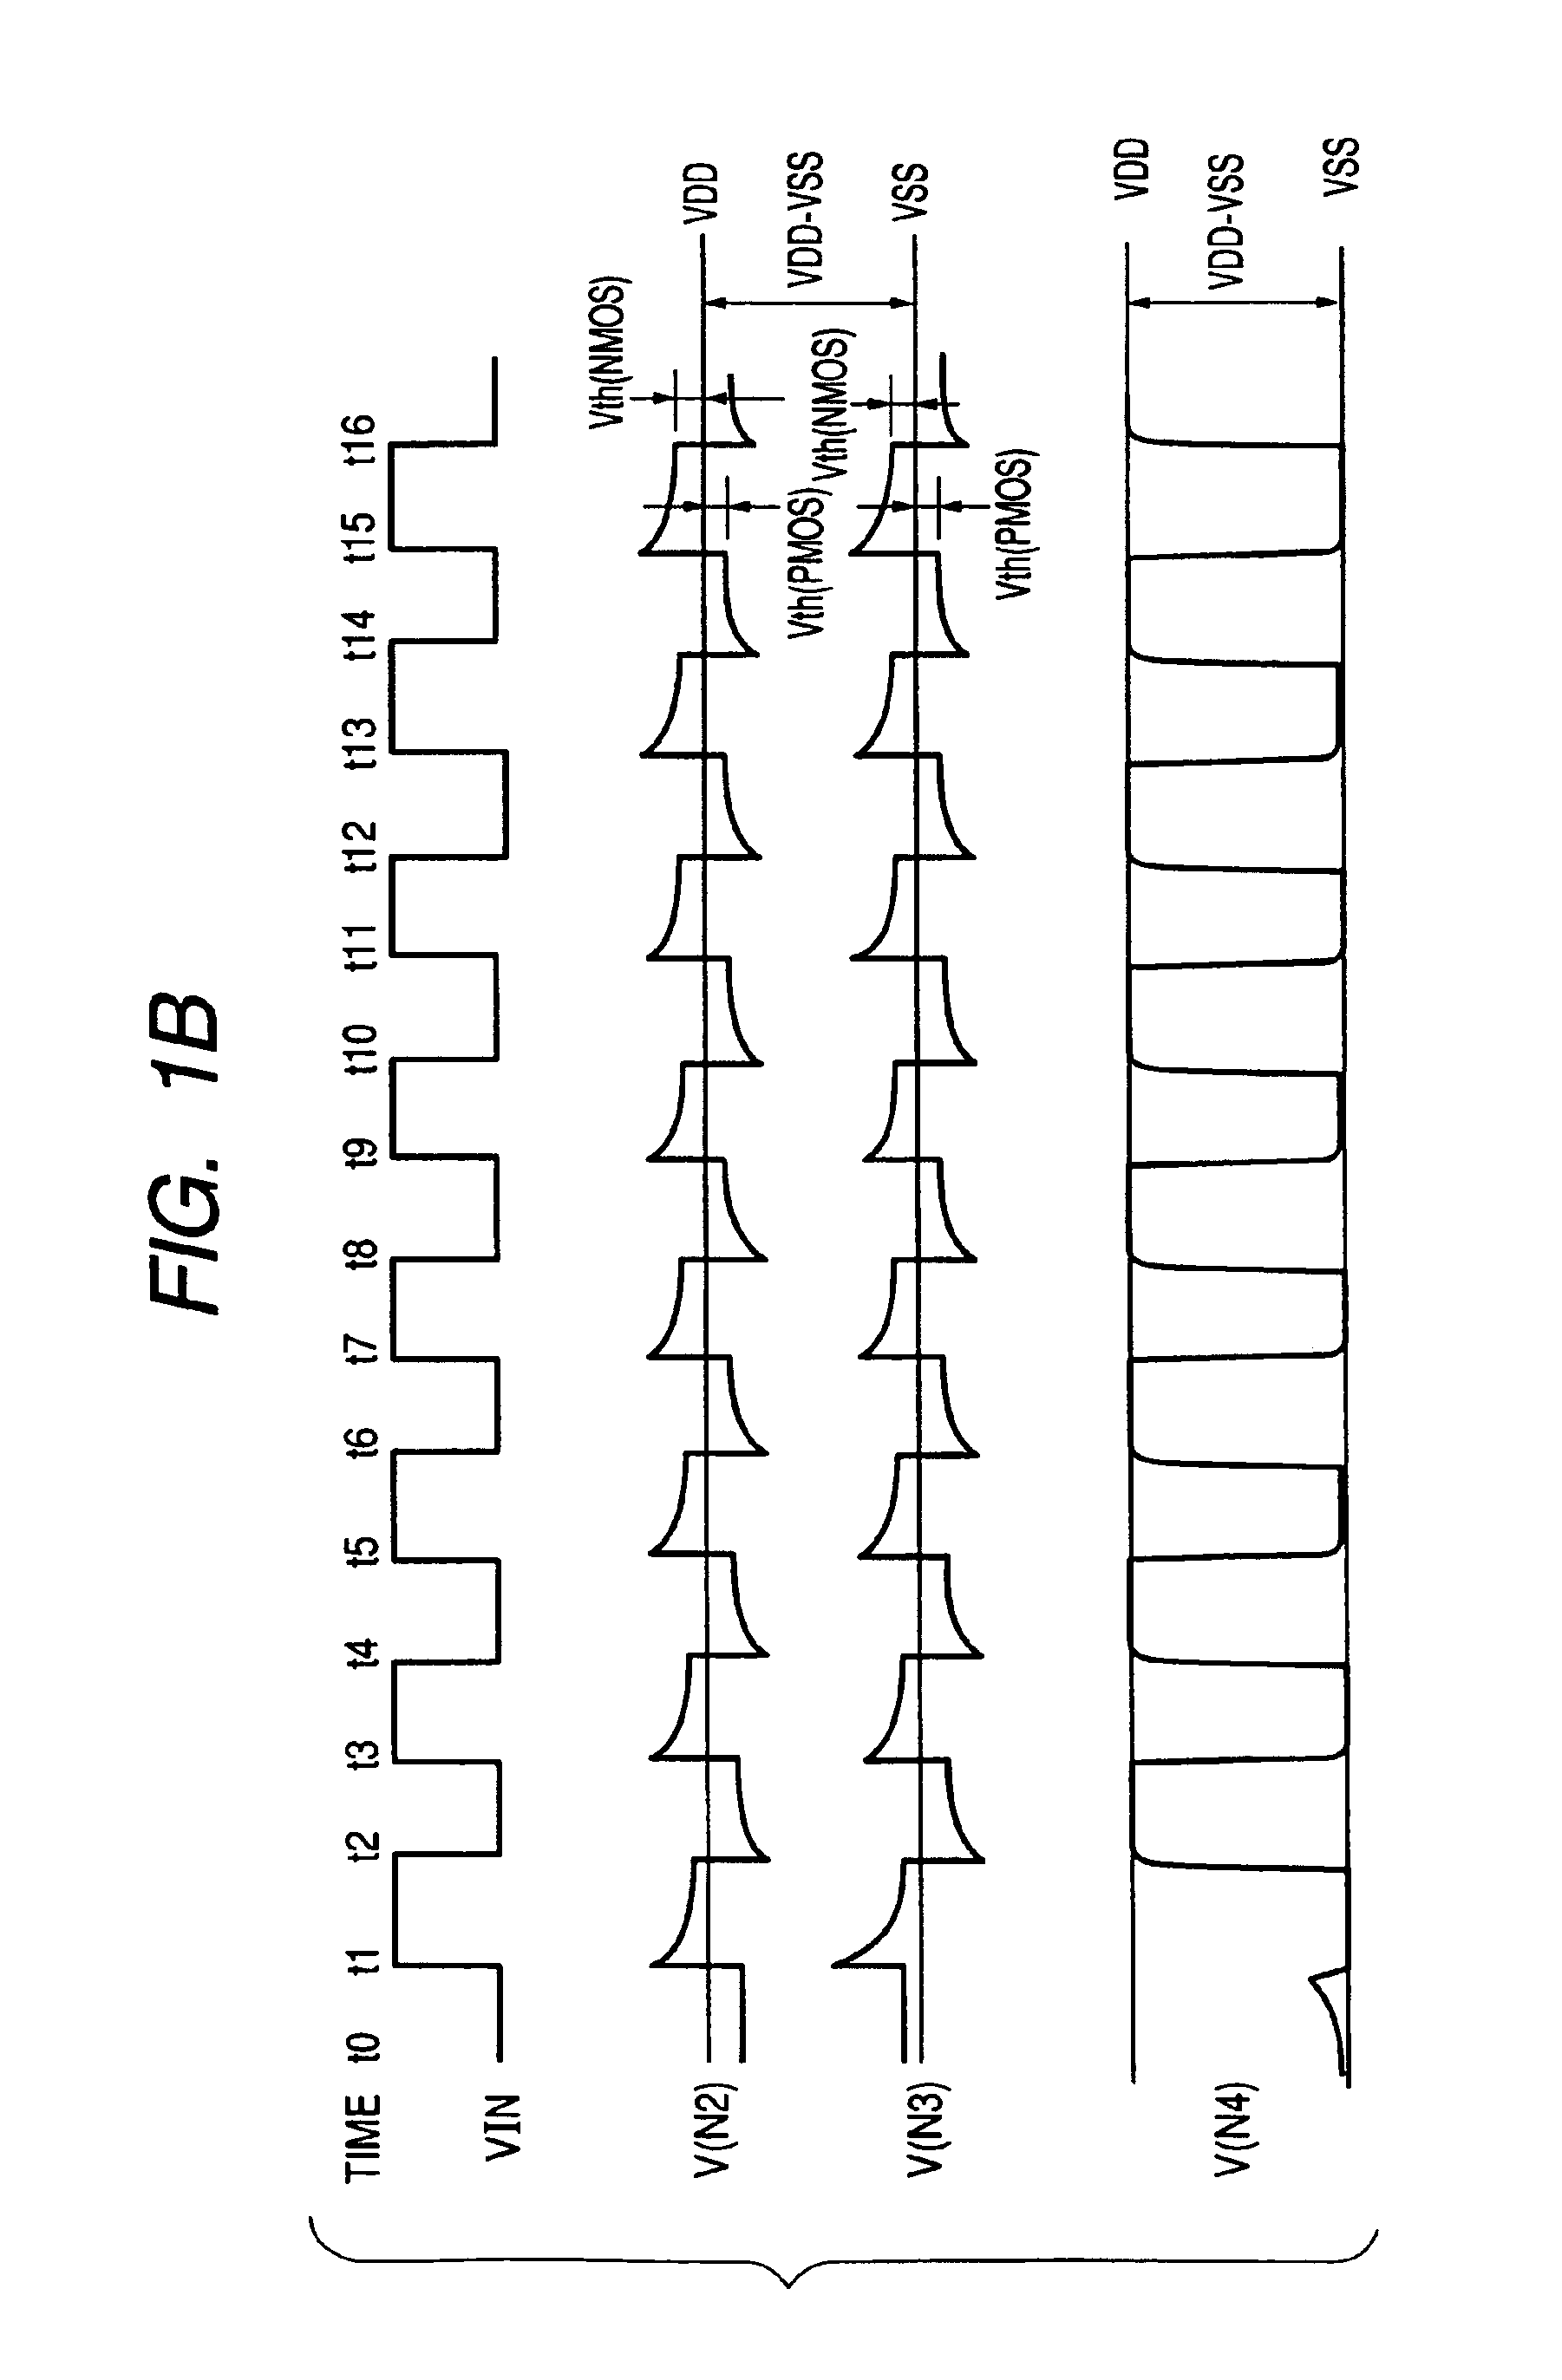 Display device having an improved voltage level converter circuit